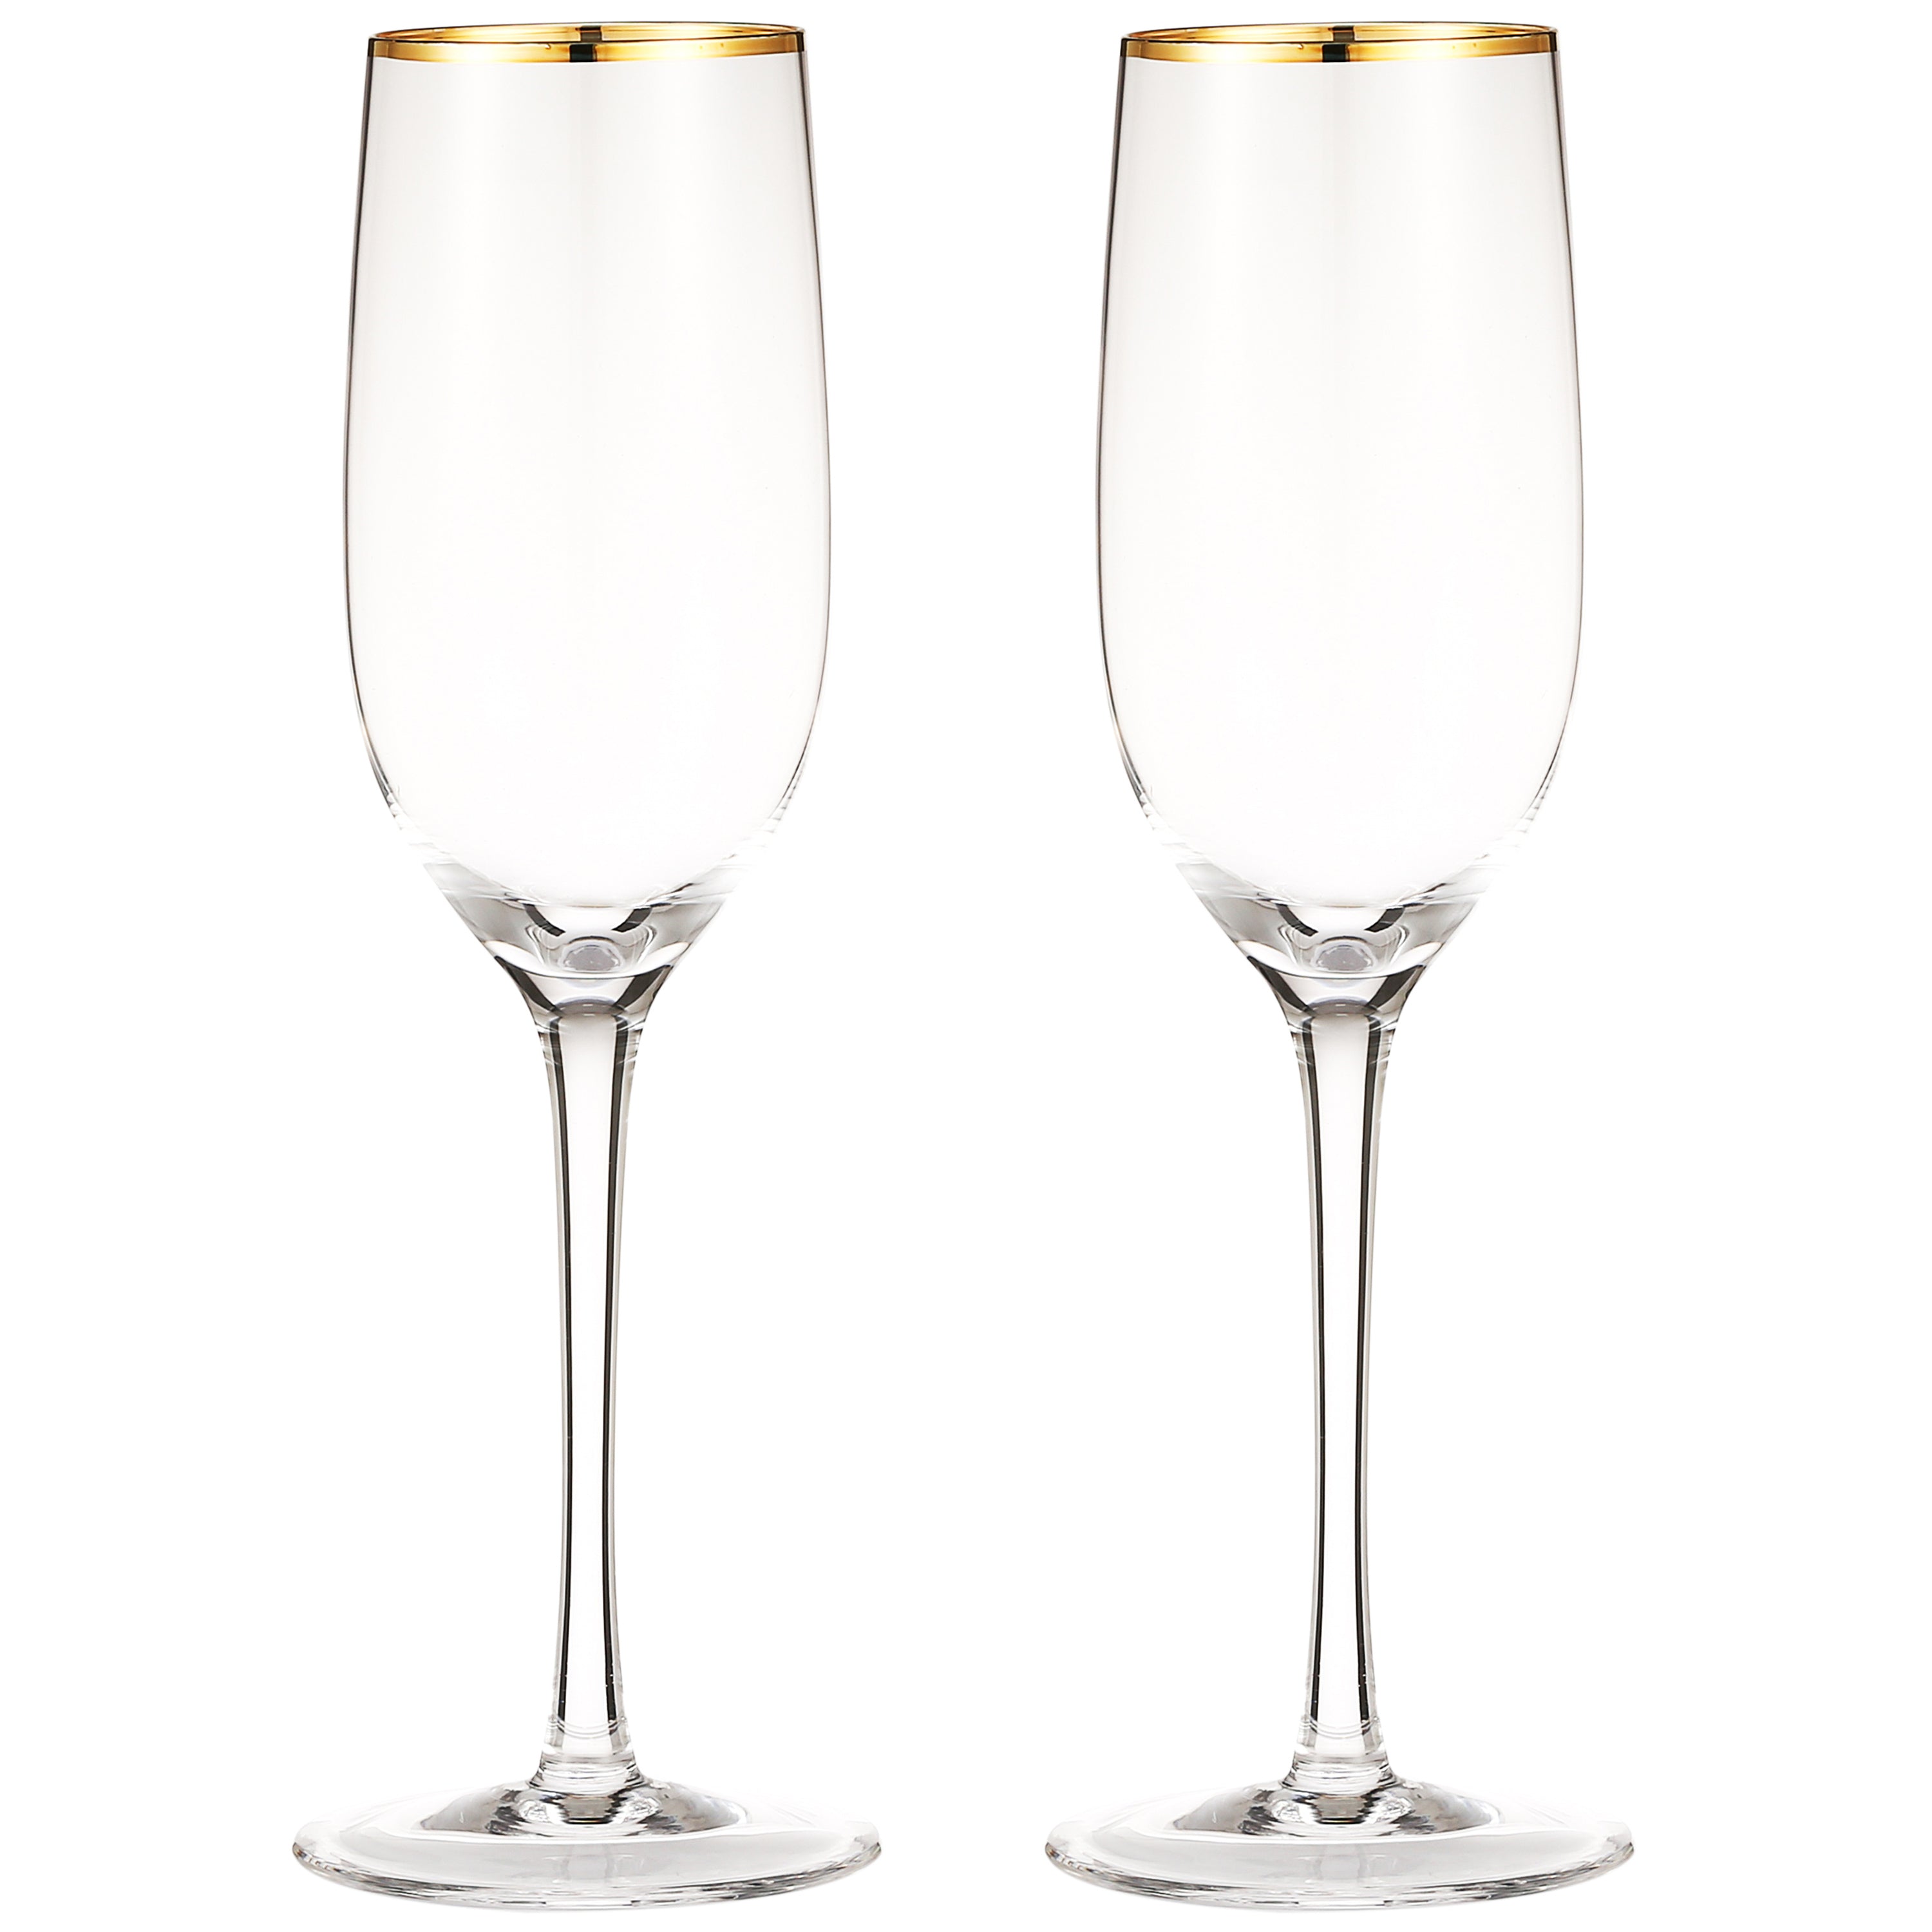 Berkware Luxurious Crystal Champagne Flutes With Elegant Gold